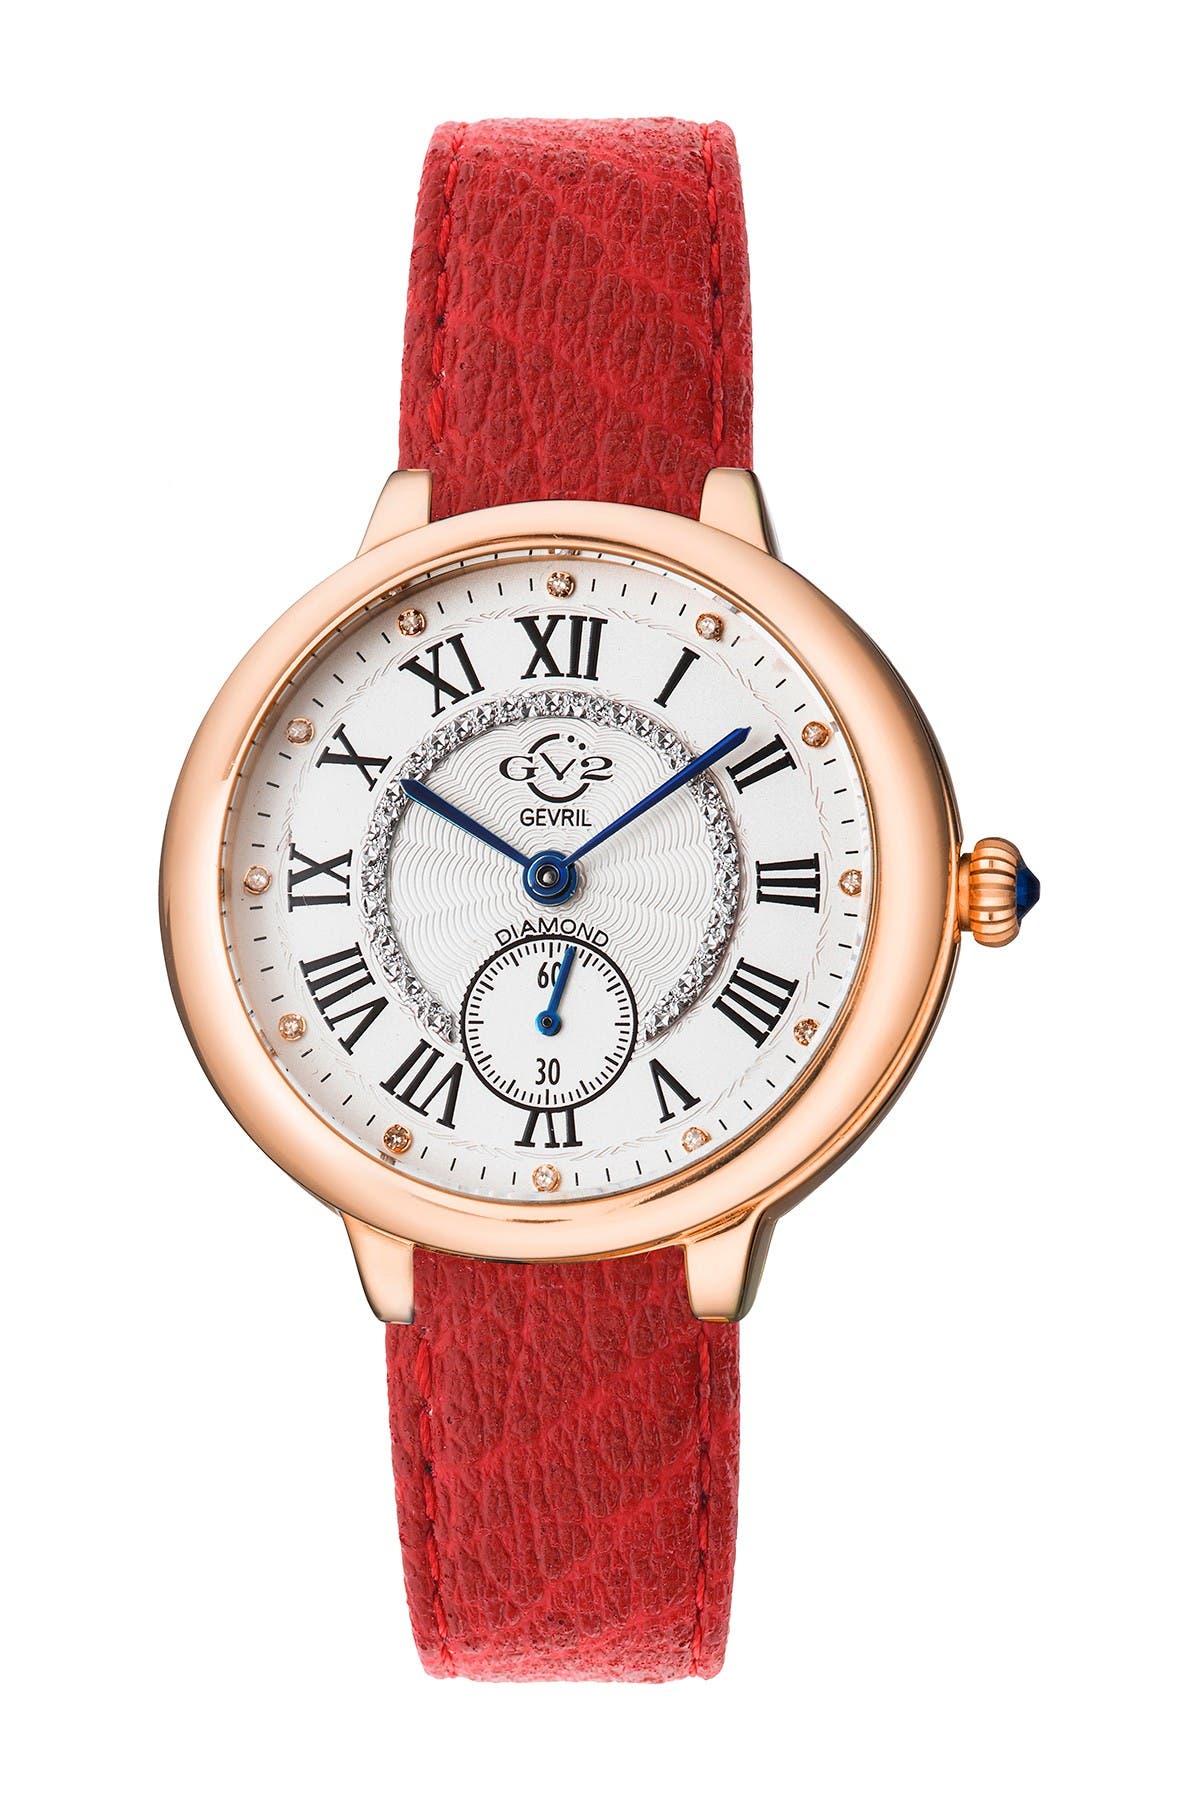 Gevril Gv2 Rome Rose Gold Diamond Vegan Leather Watch, 36mm In Red